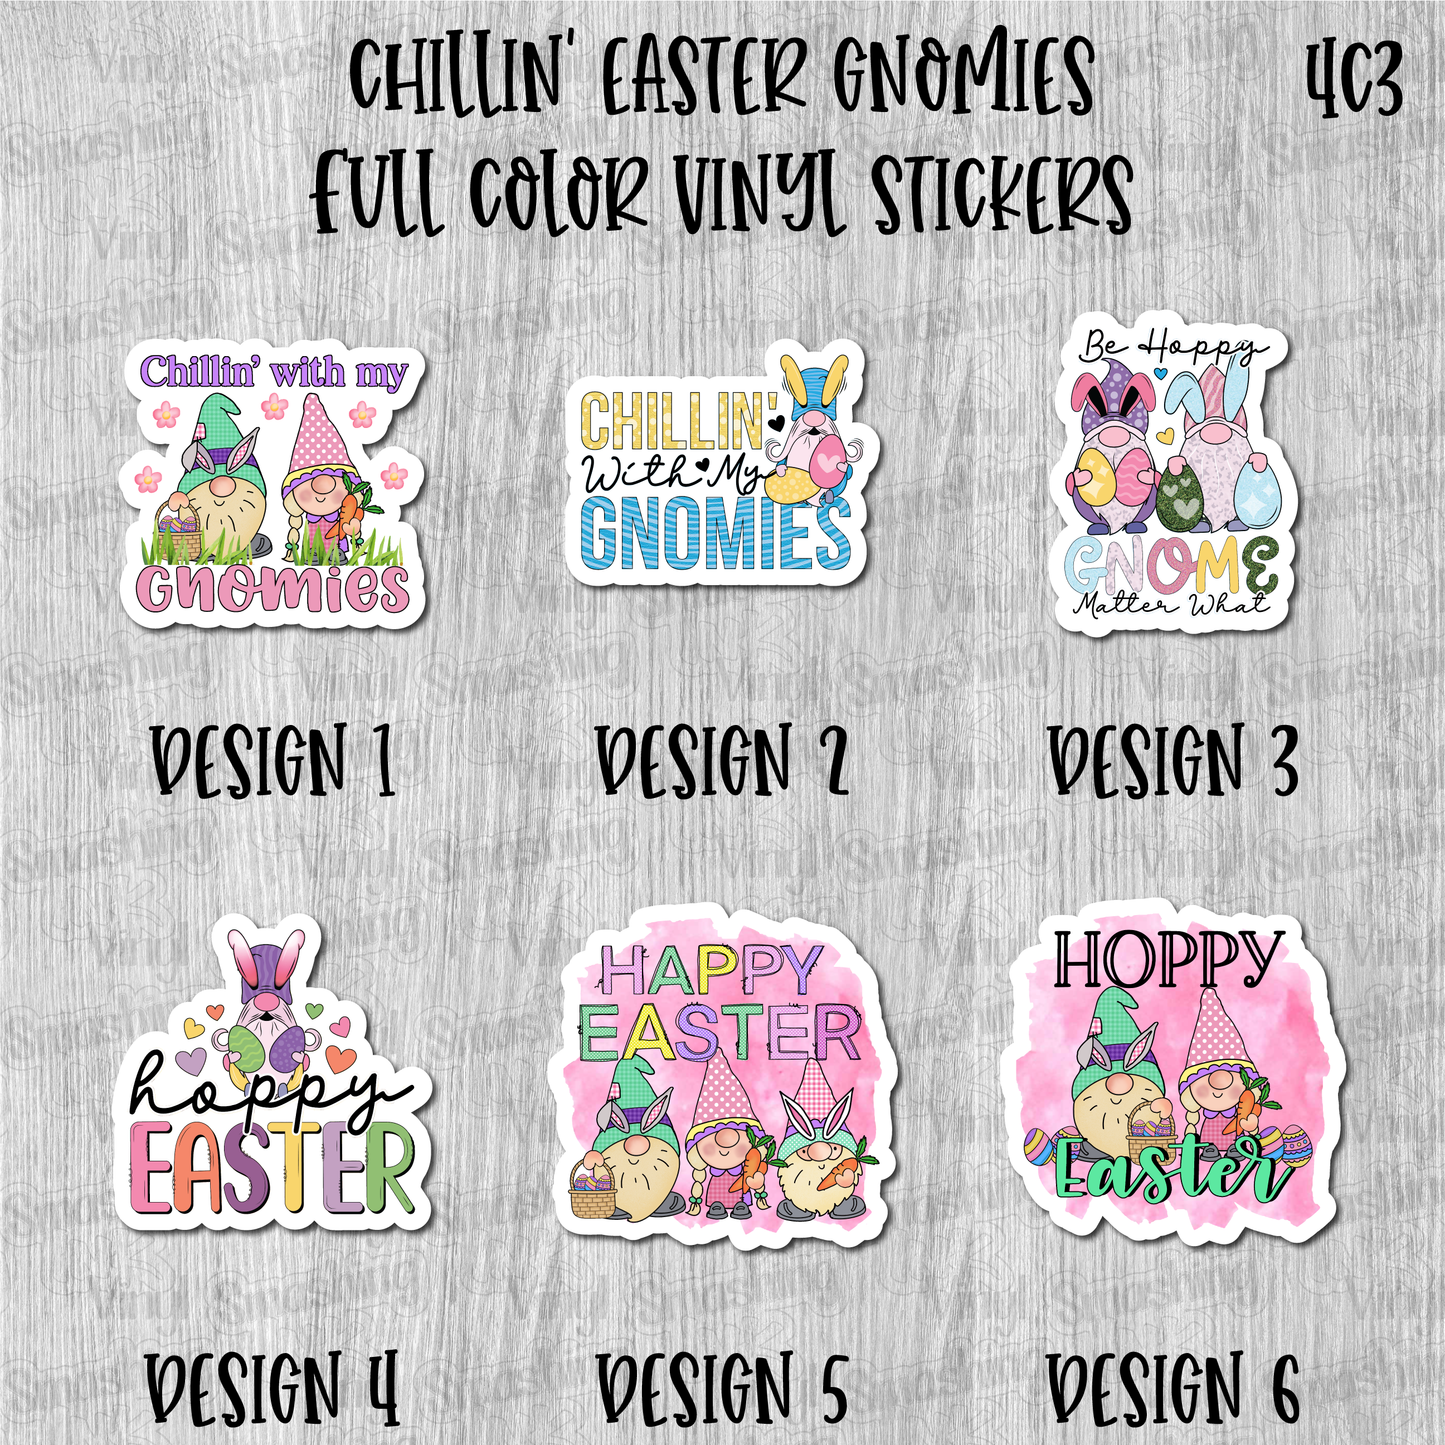 Chillin' Easter Gnomies - Full Color Vinyl Stickers (SHIPS IN 3-7 BUS DAYS)